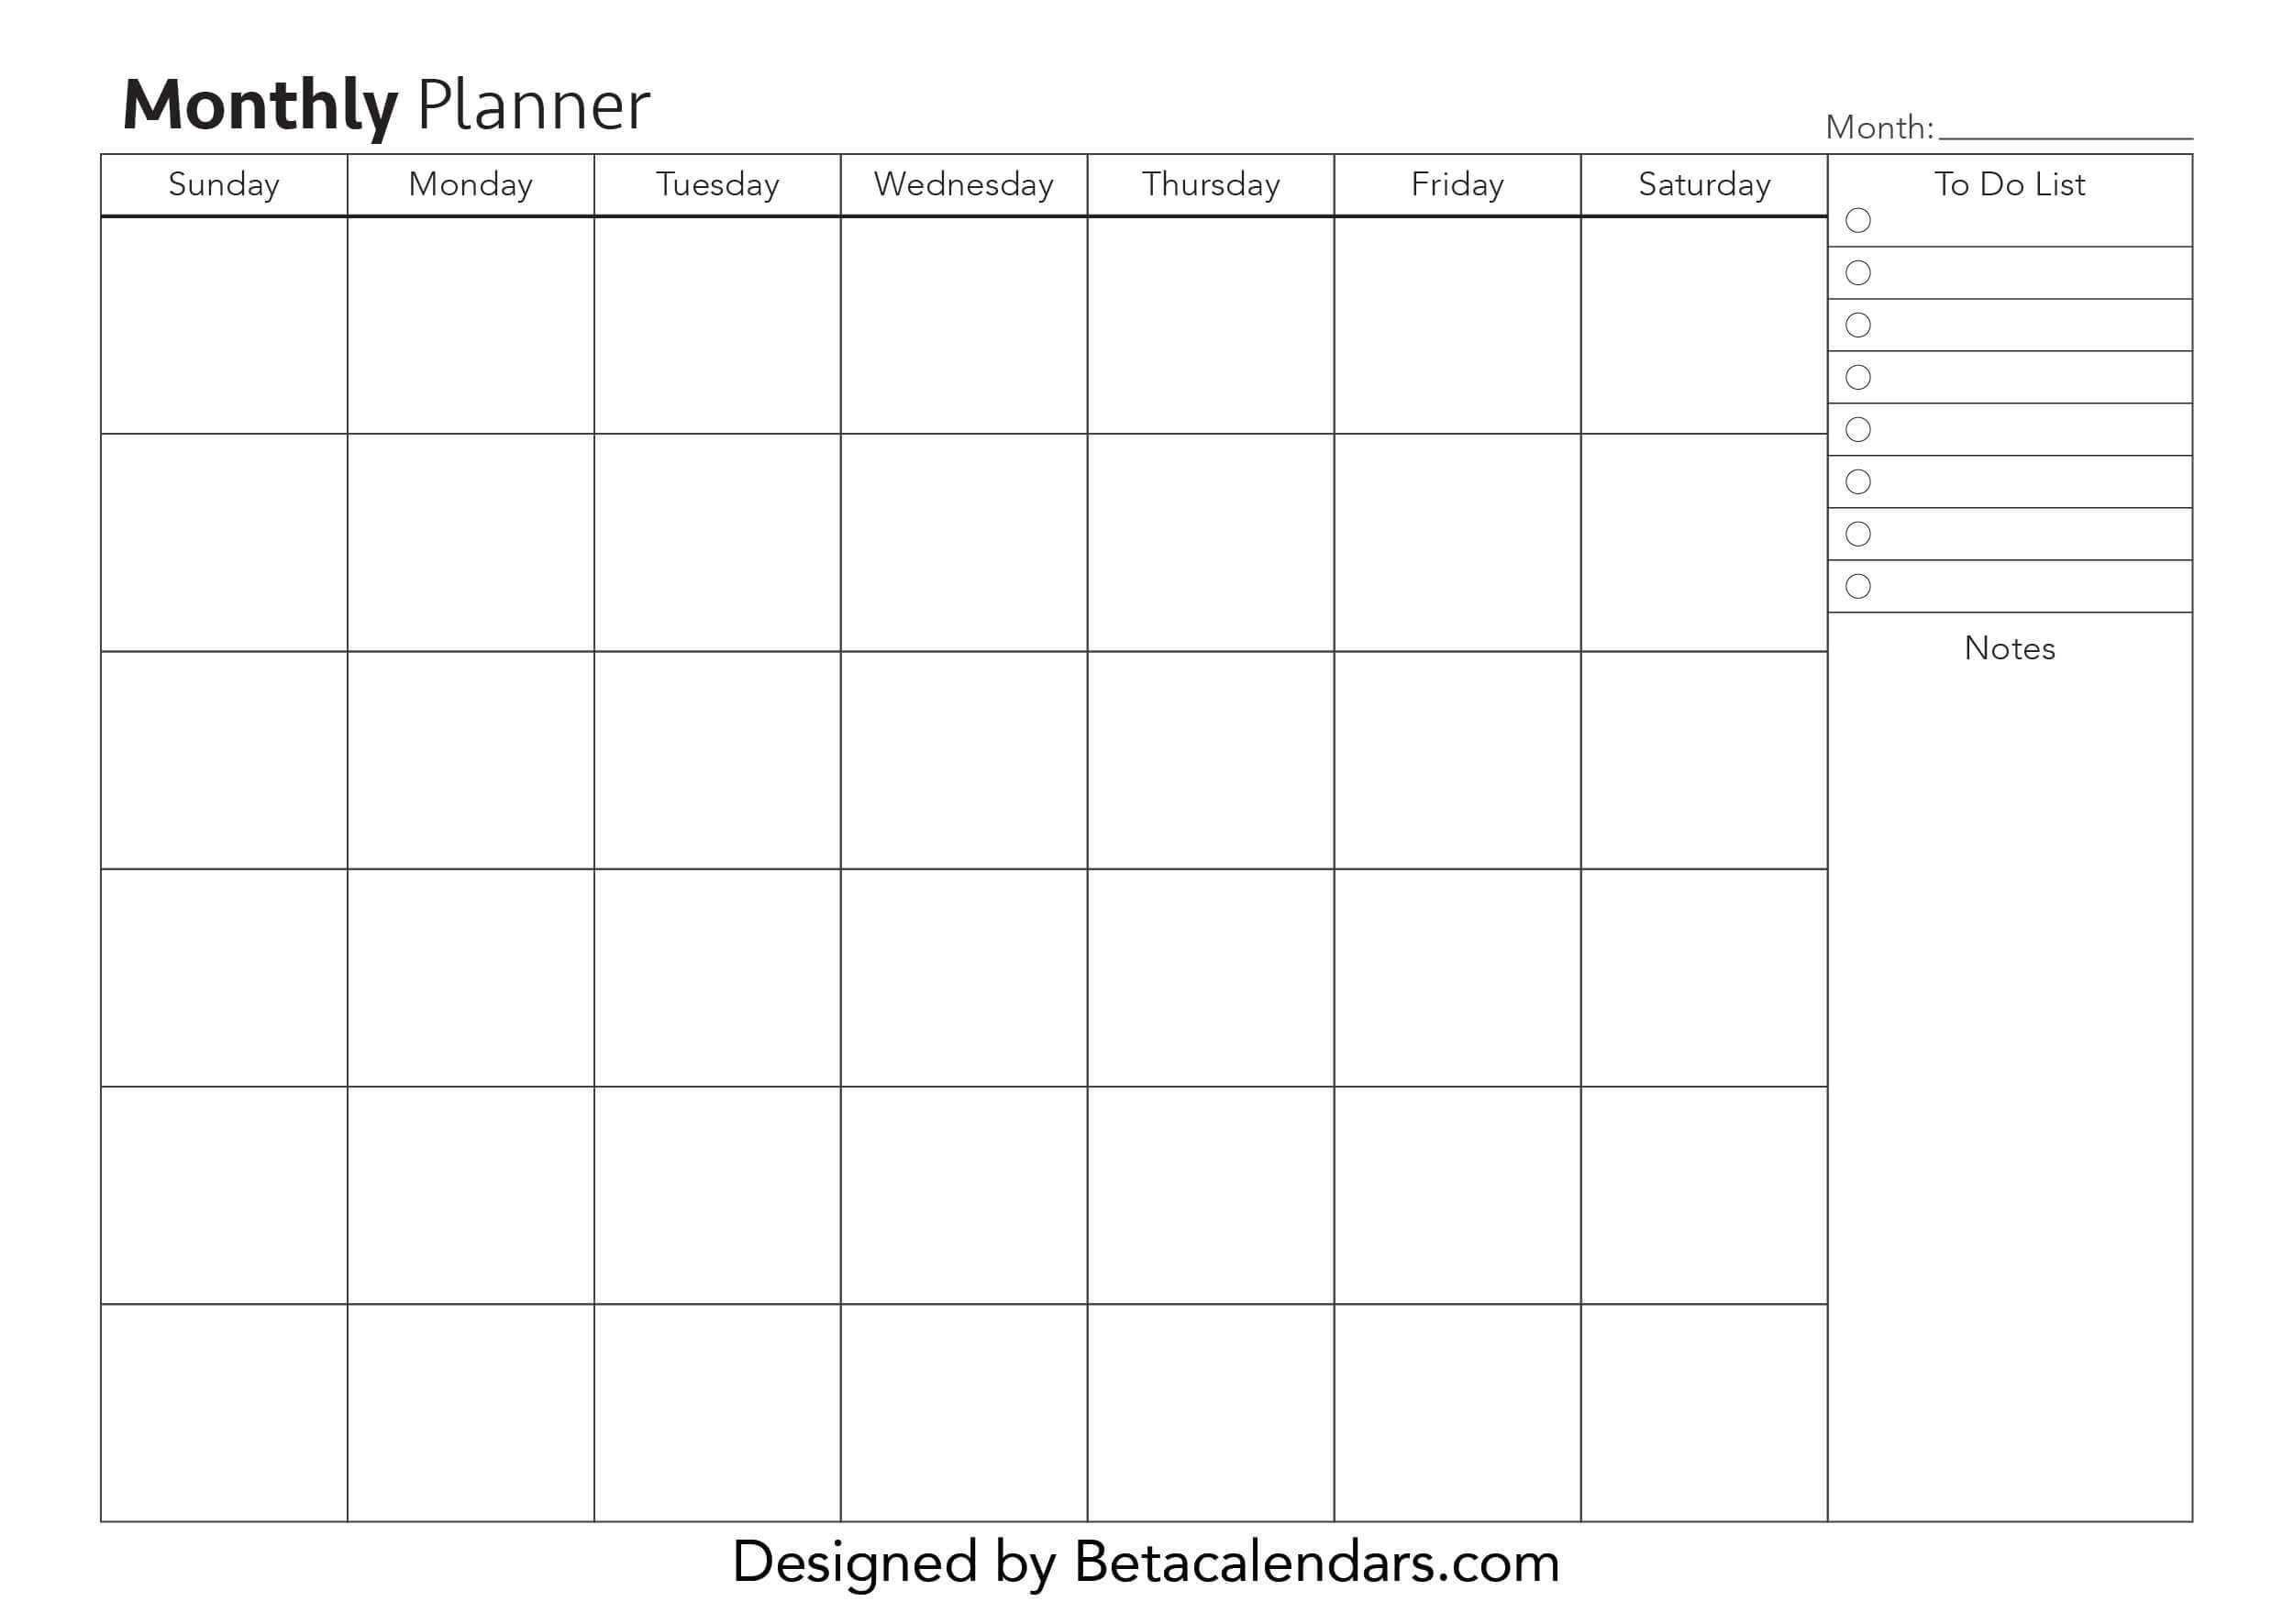 Free Printable Monthly Planner – Beta Calendars Throughout Month At A Glance Blank Calendar Template